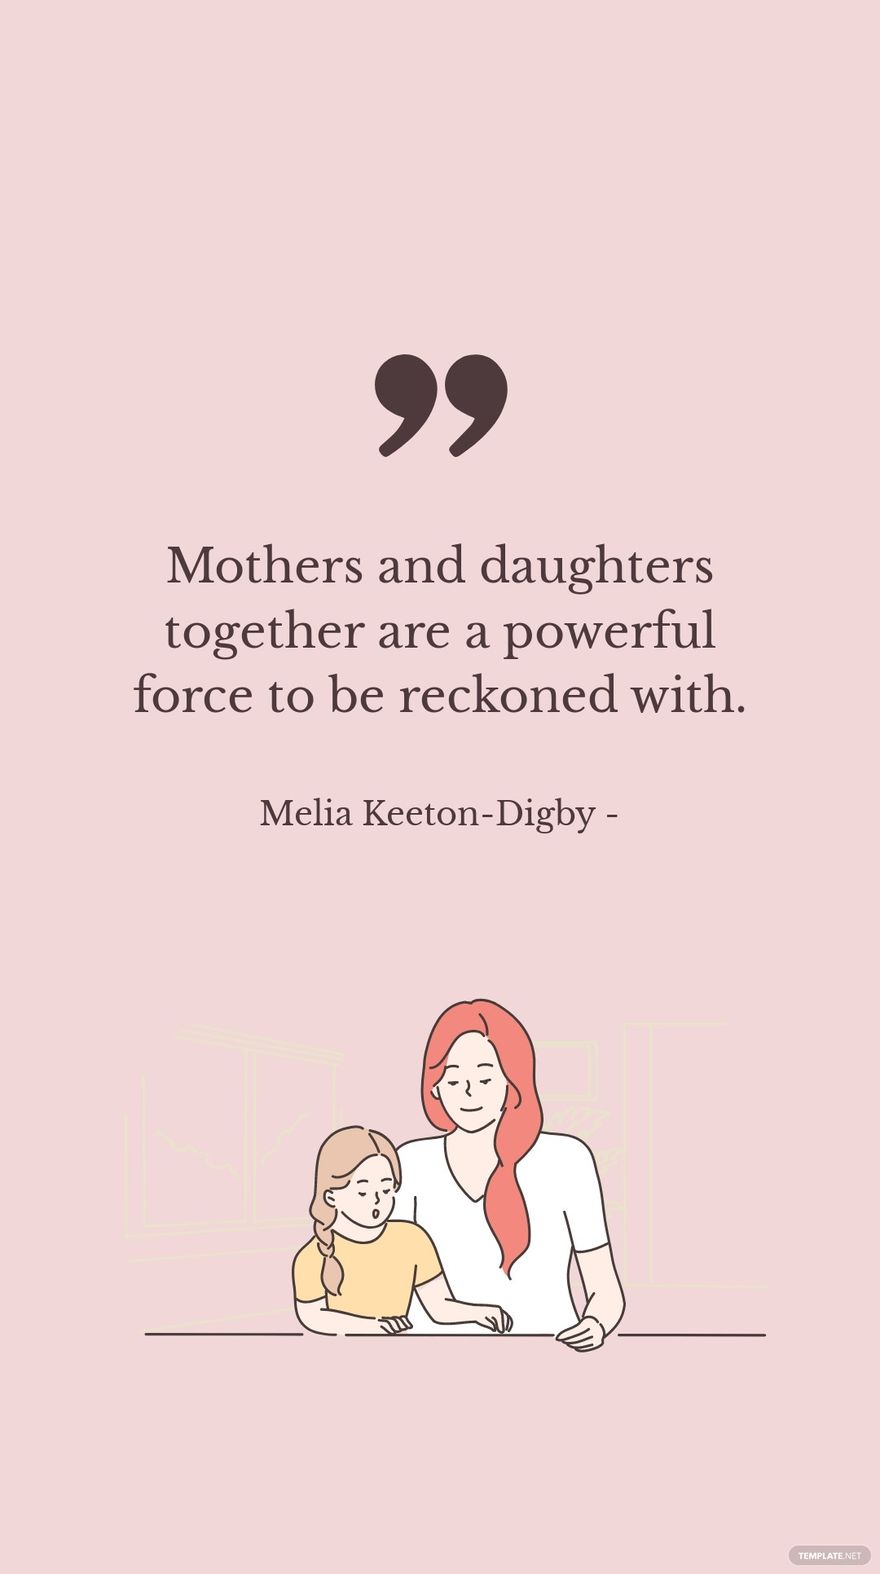 Free Melia Keeton-Digby - Mothers and daughters together are a powerful force to be reckoned with. in JPG